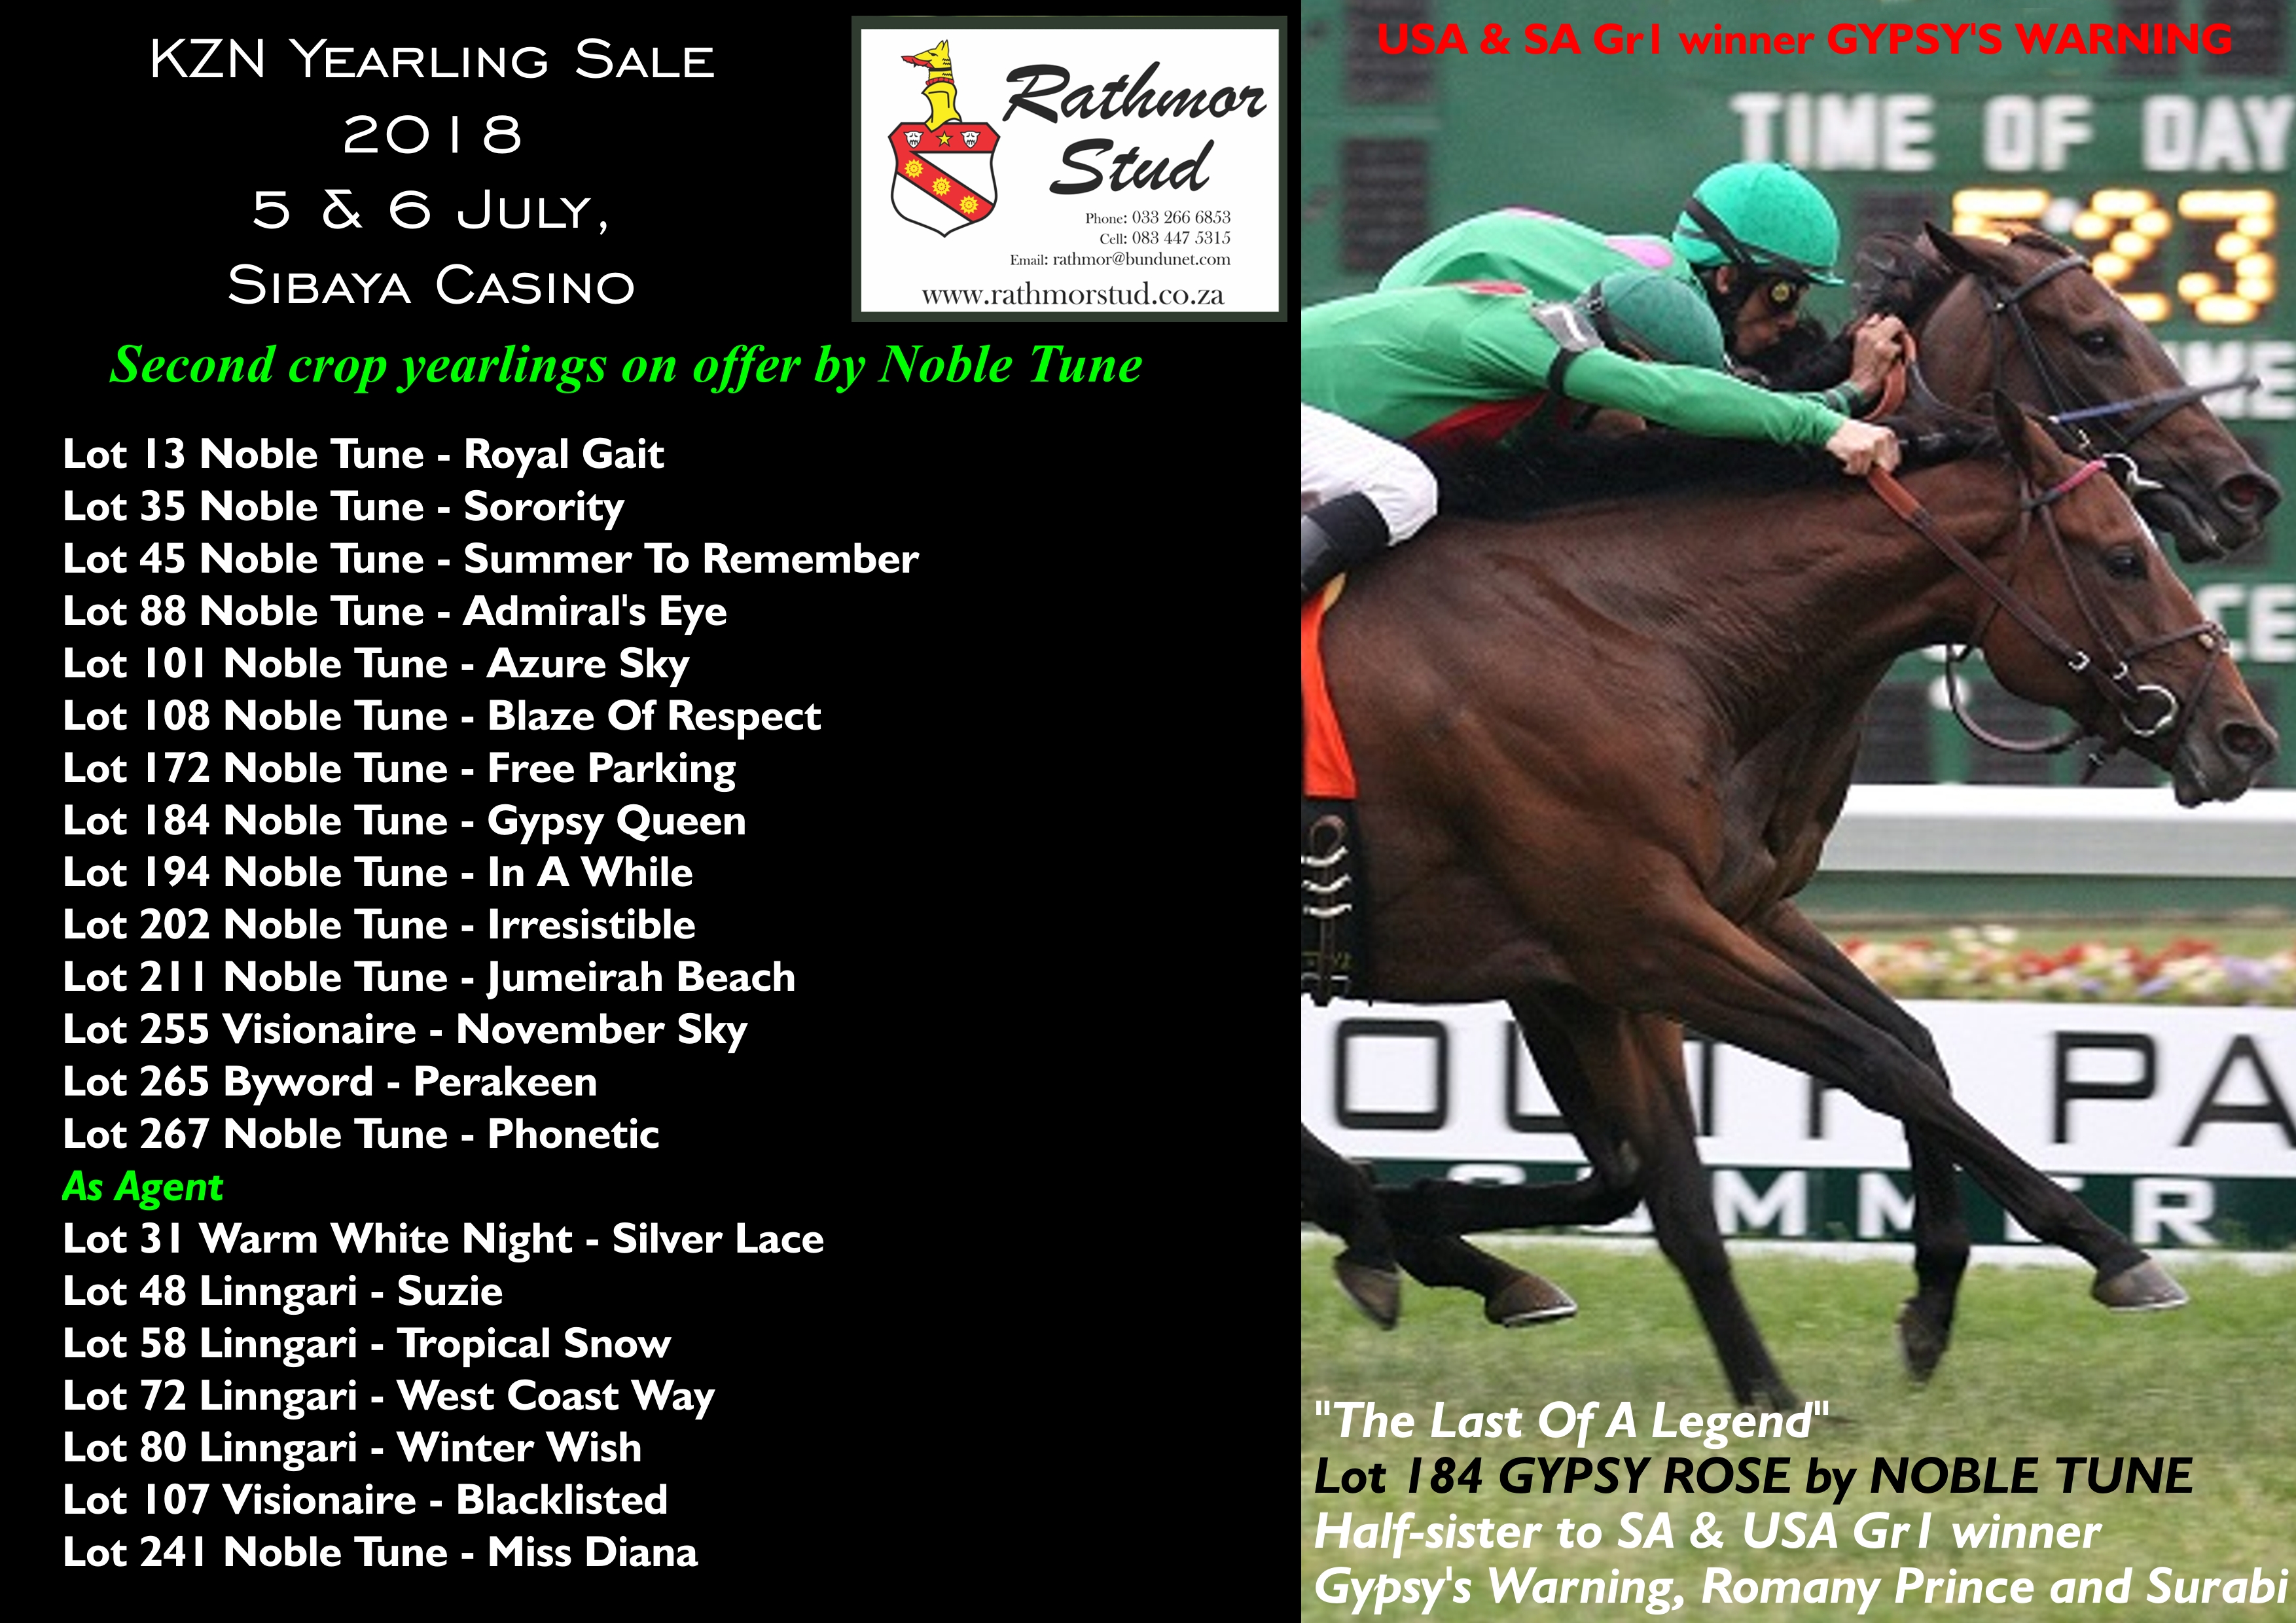 Rathmor Stud At The KZN Yearling Sale